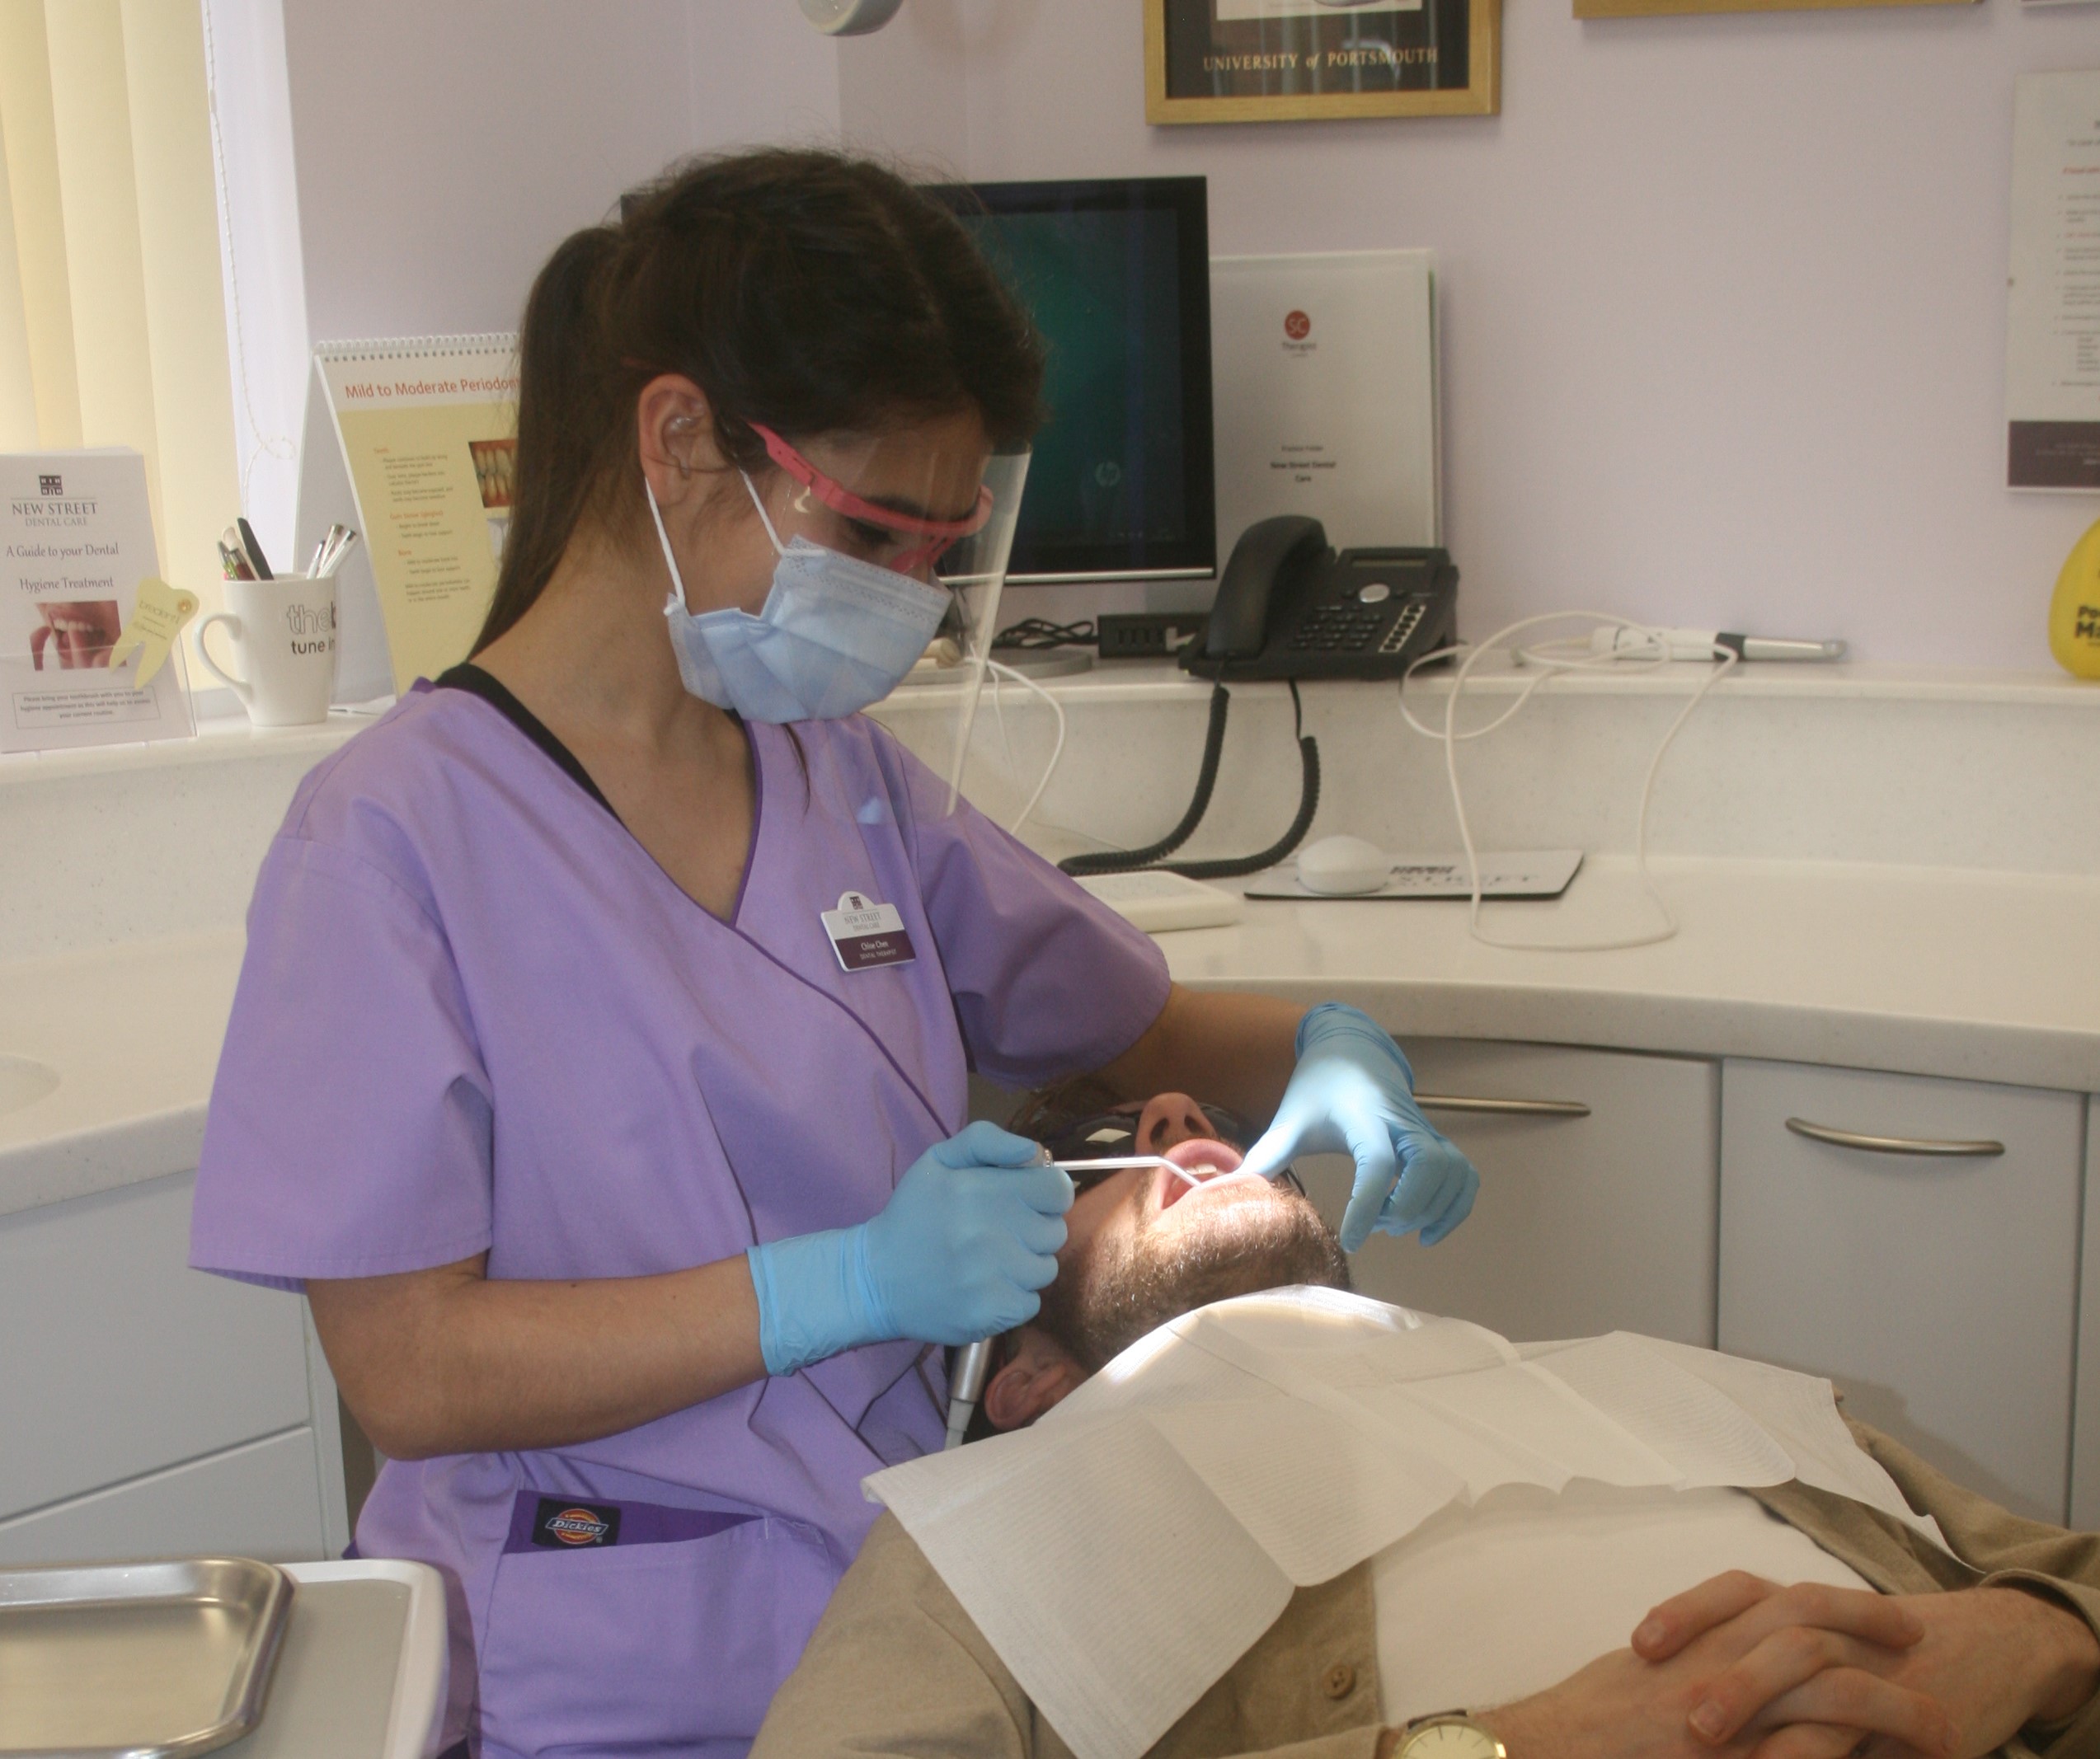 Chloe the dental hygienist treating a patient in the chair